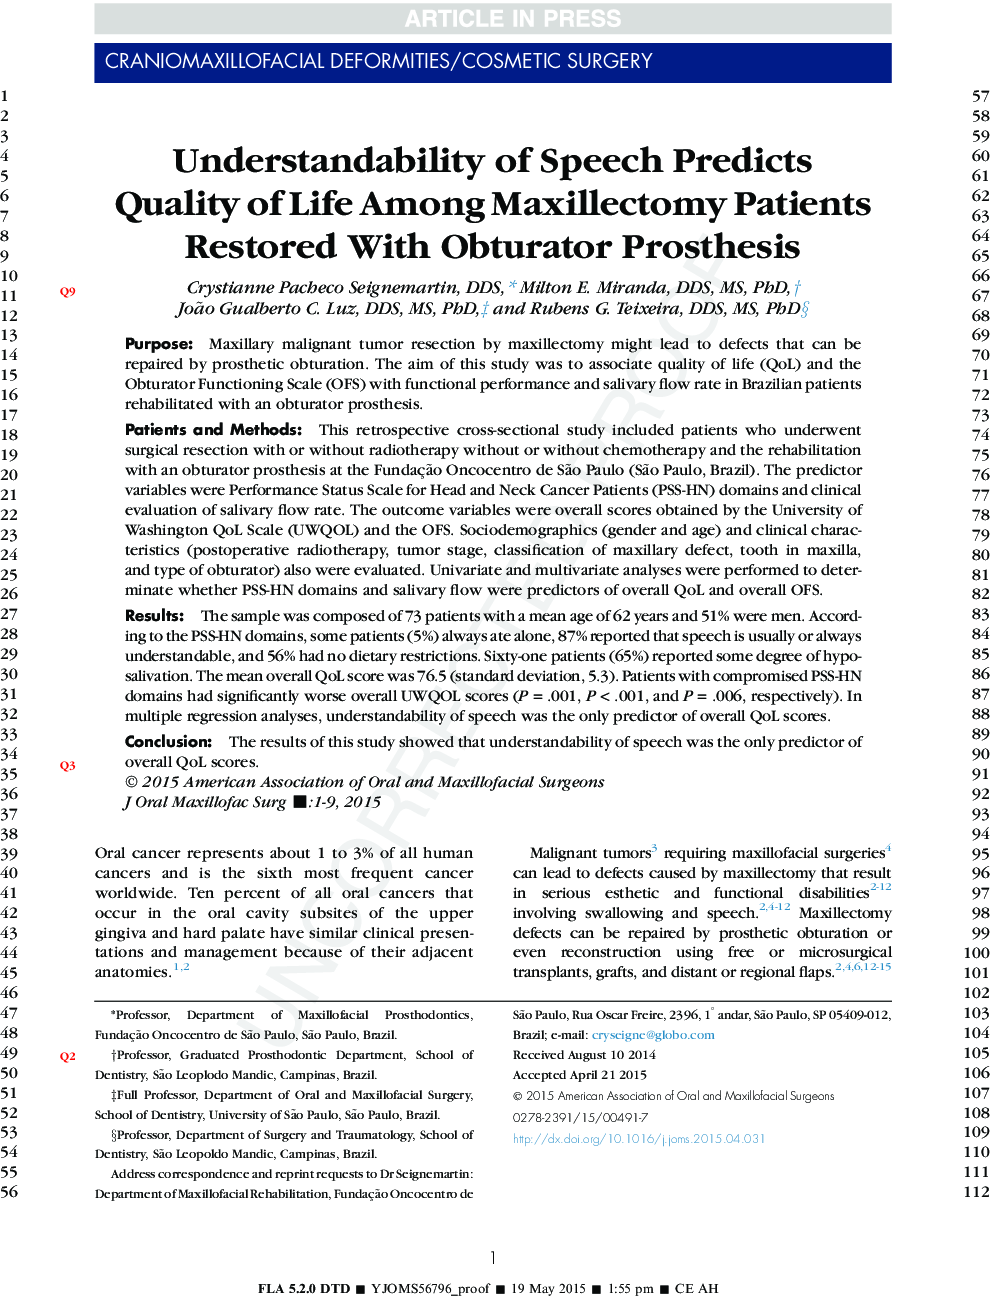 Understandability of Speech Predicts Quality of Life Among Maxillectomy Patients Restored With Obturator Prosthesis